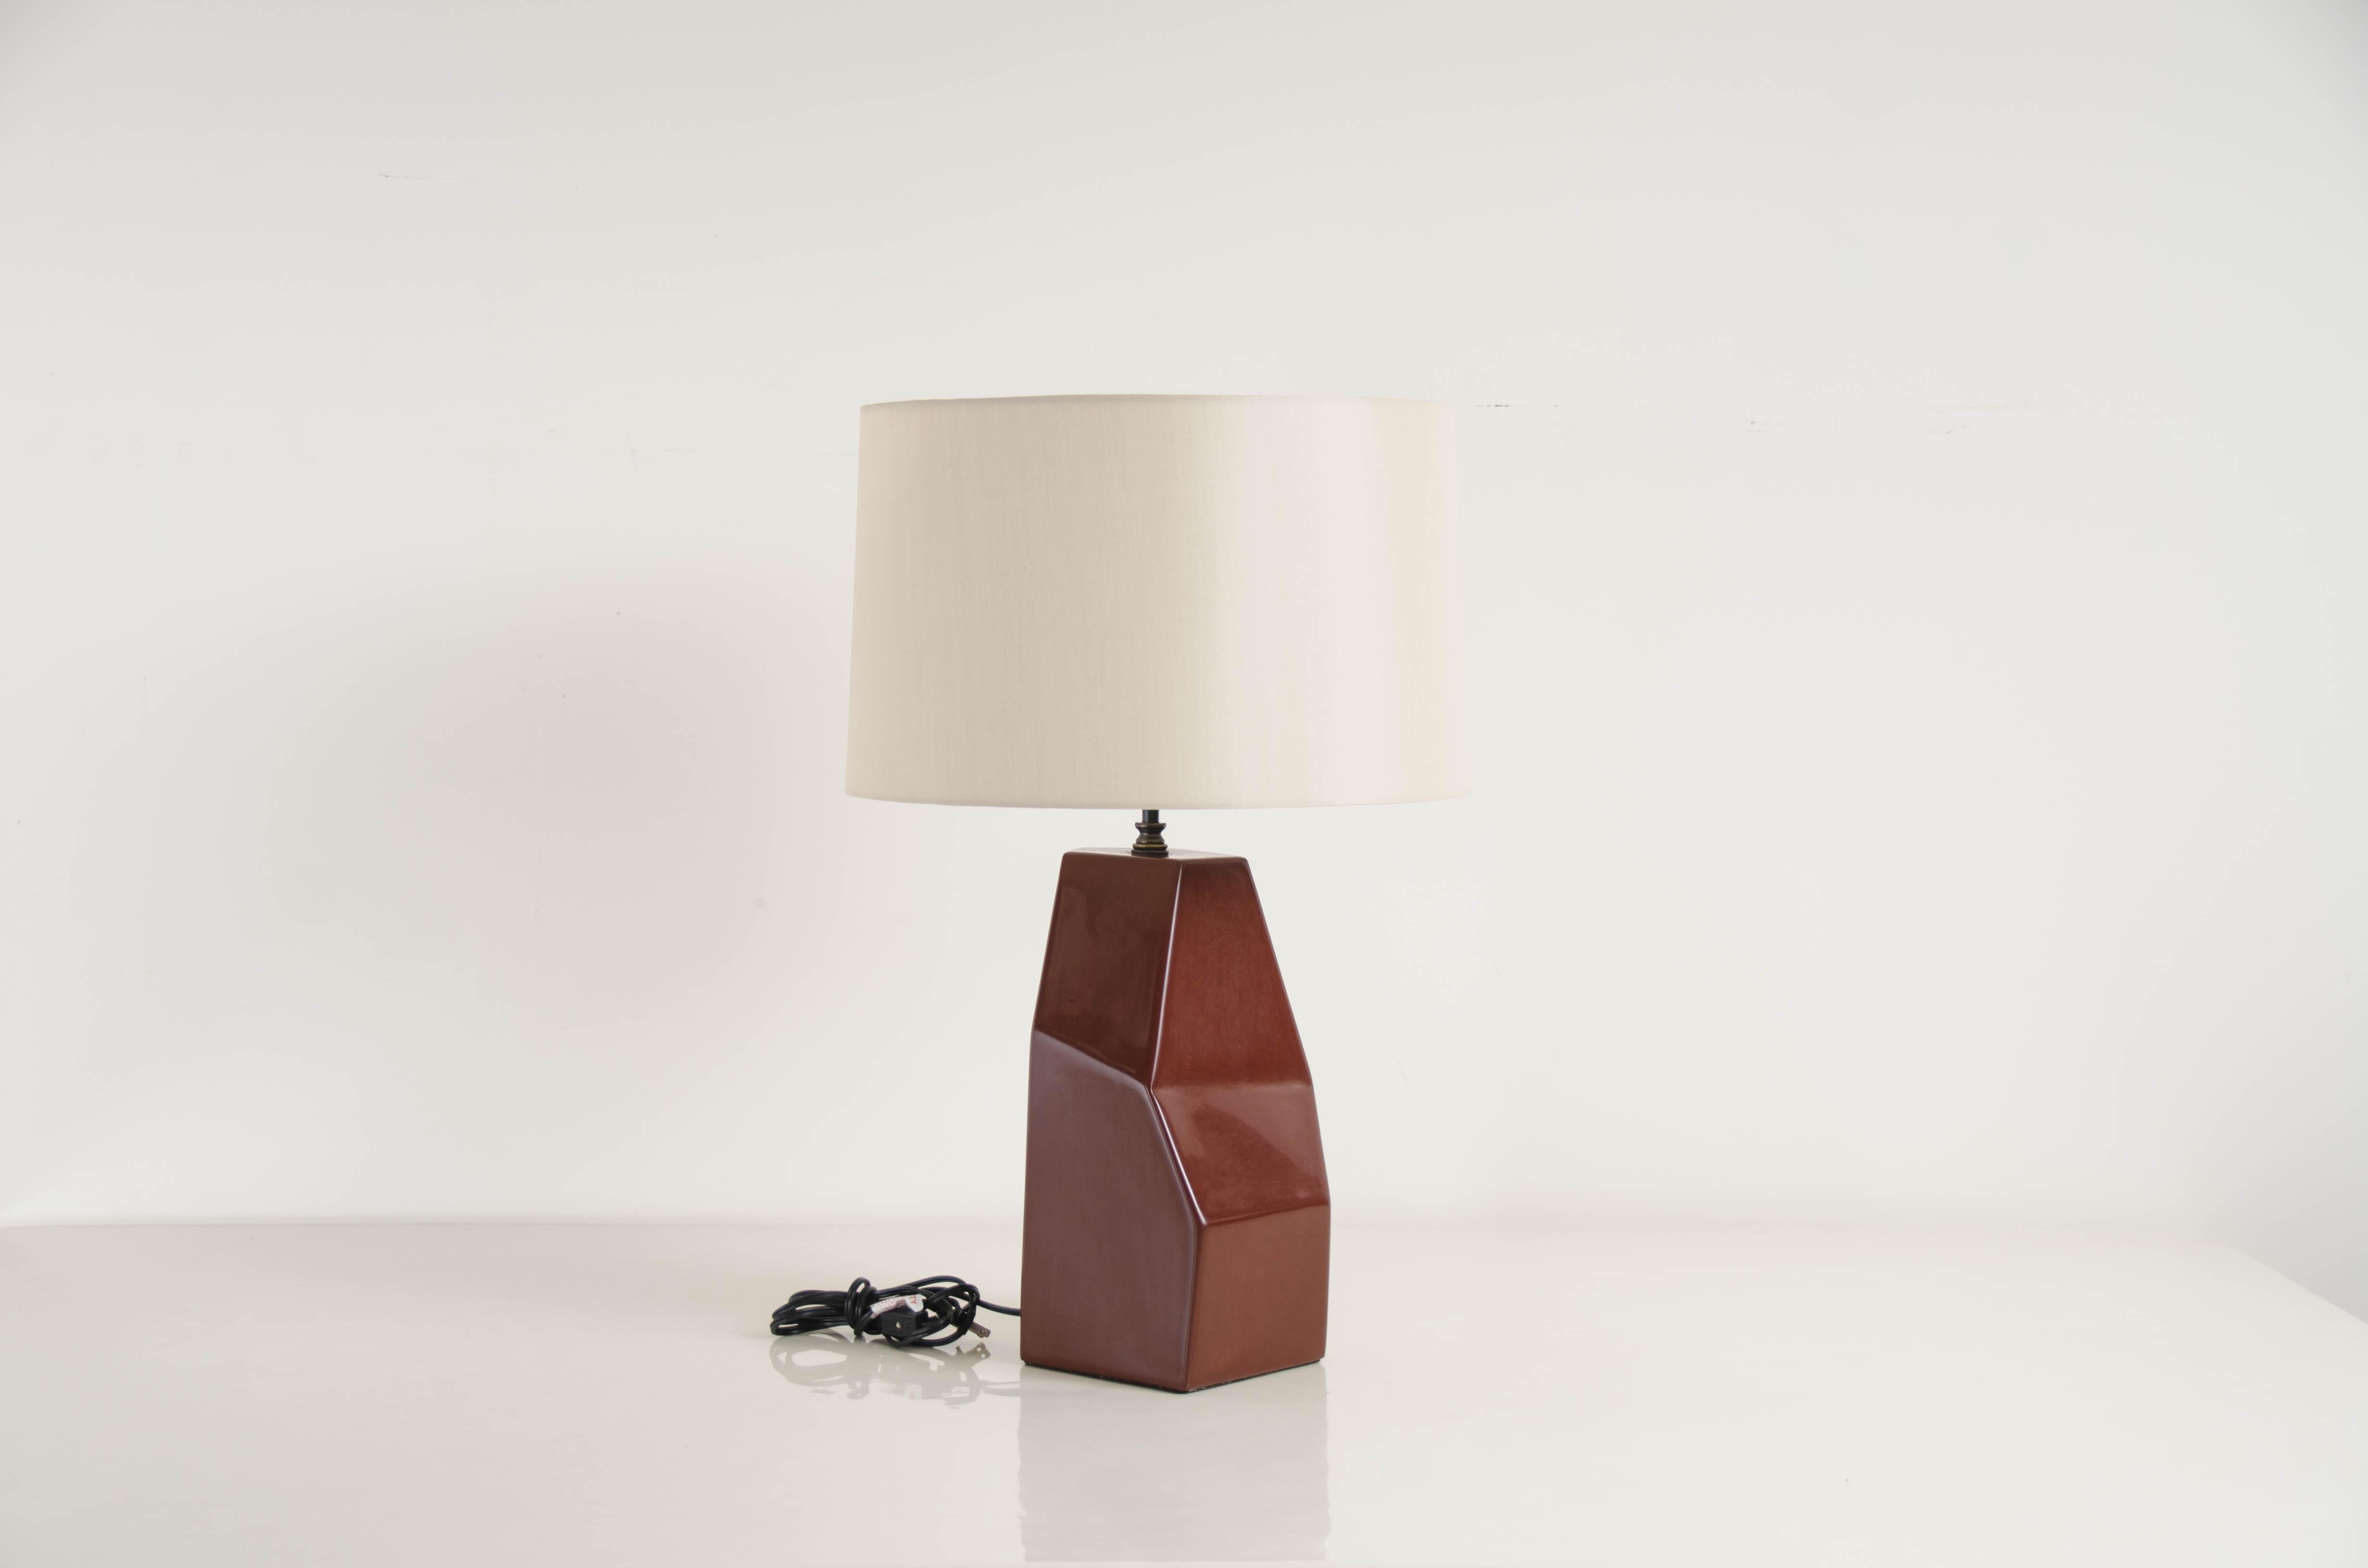 Faceted Shan lamp
Red bean lacquer
Hand repousse
Natural silk shade
Limited Edition
Base dimensions: 7 1/2